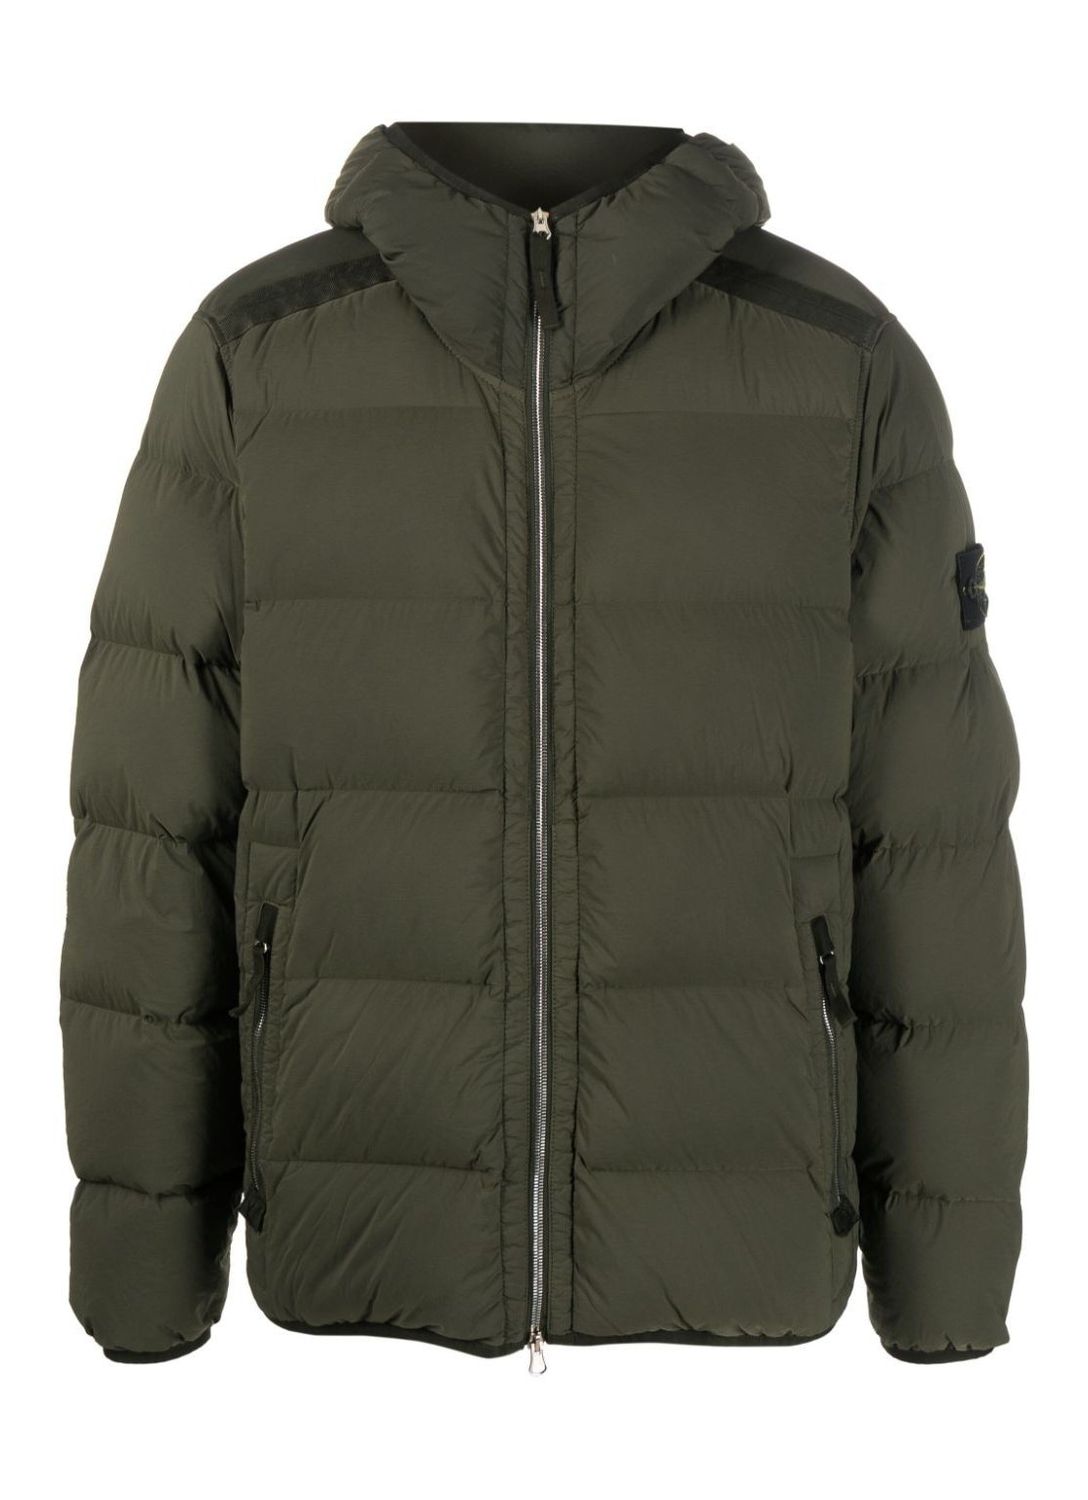 Men's Green Down Jacket with Removable Logo Patch and Zippered Pockets